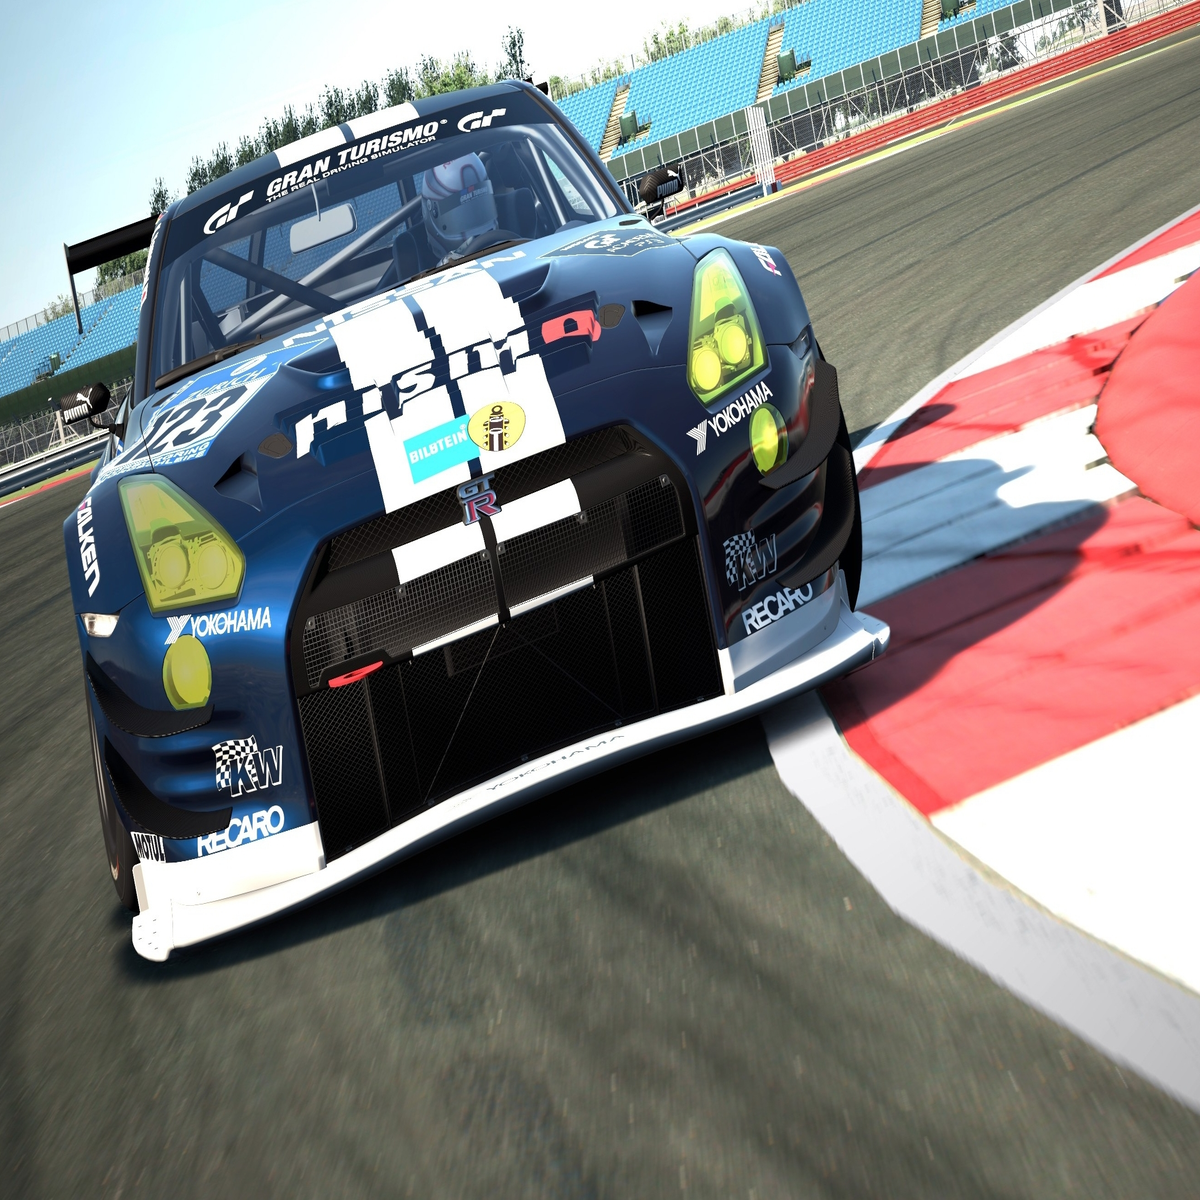 Quick Match has been added to GT6 expading the world of online